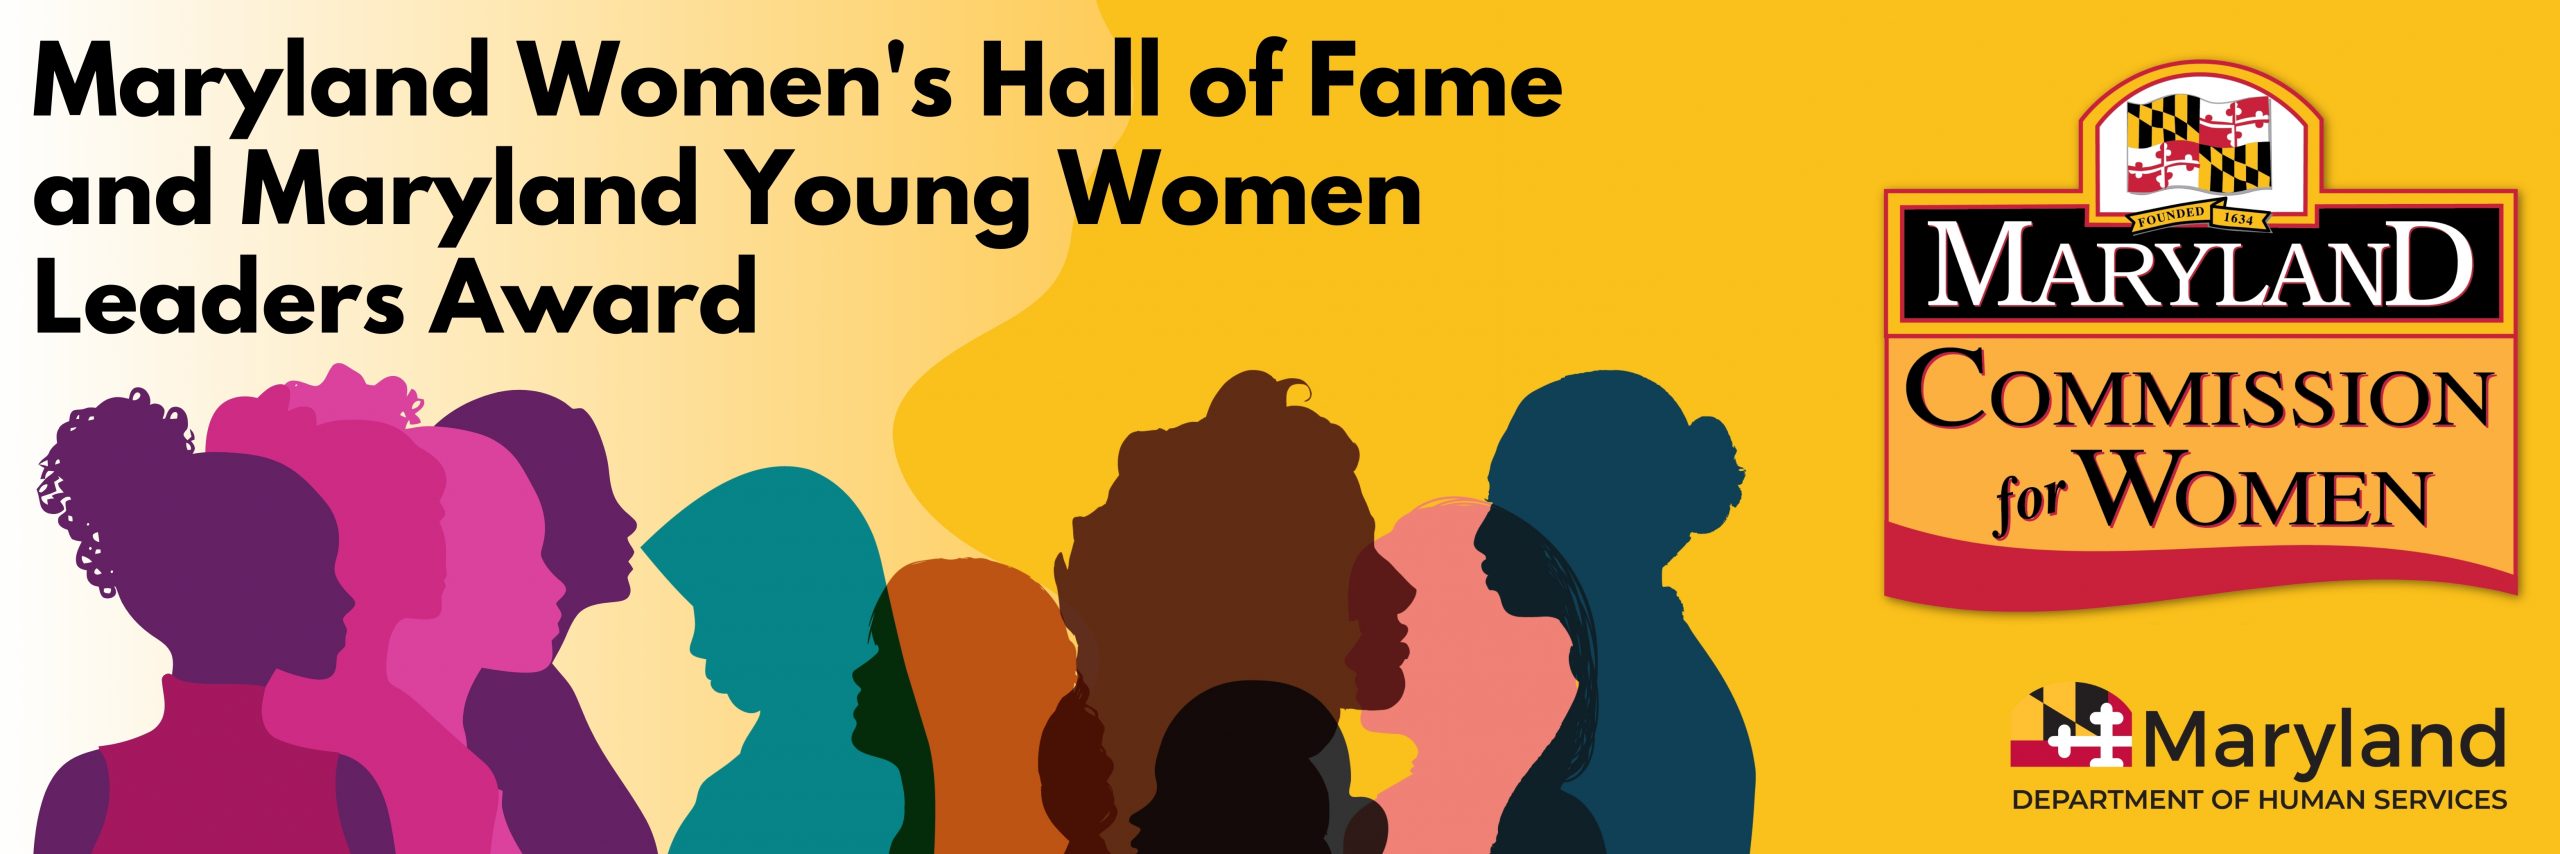 Maryland Women's Hall of Fame and Maryland Young Women Leaders Award